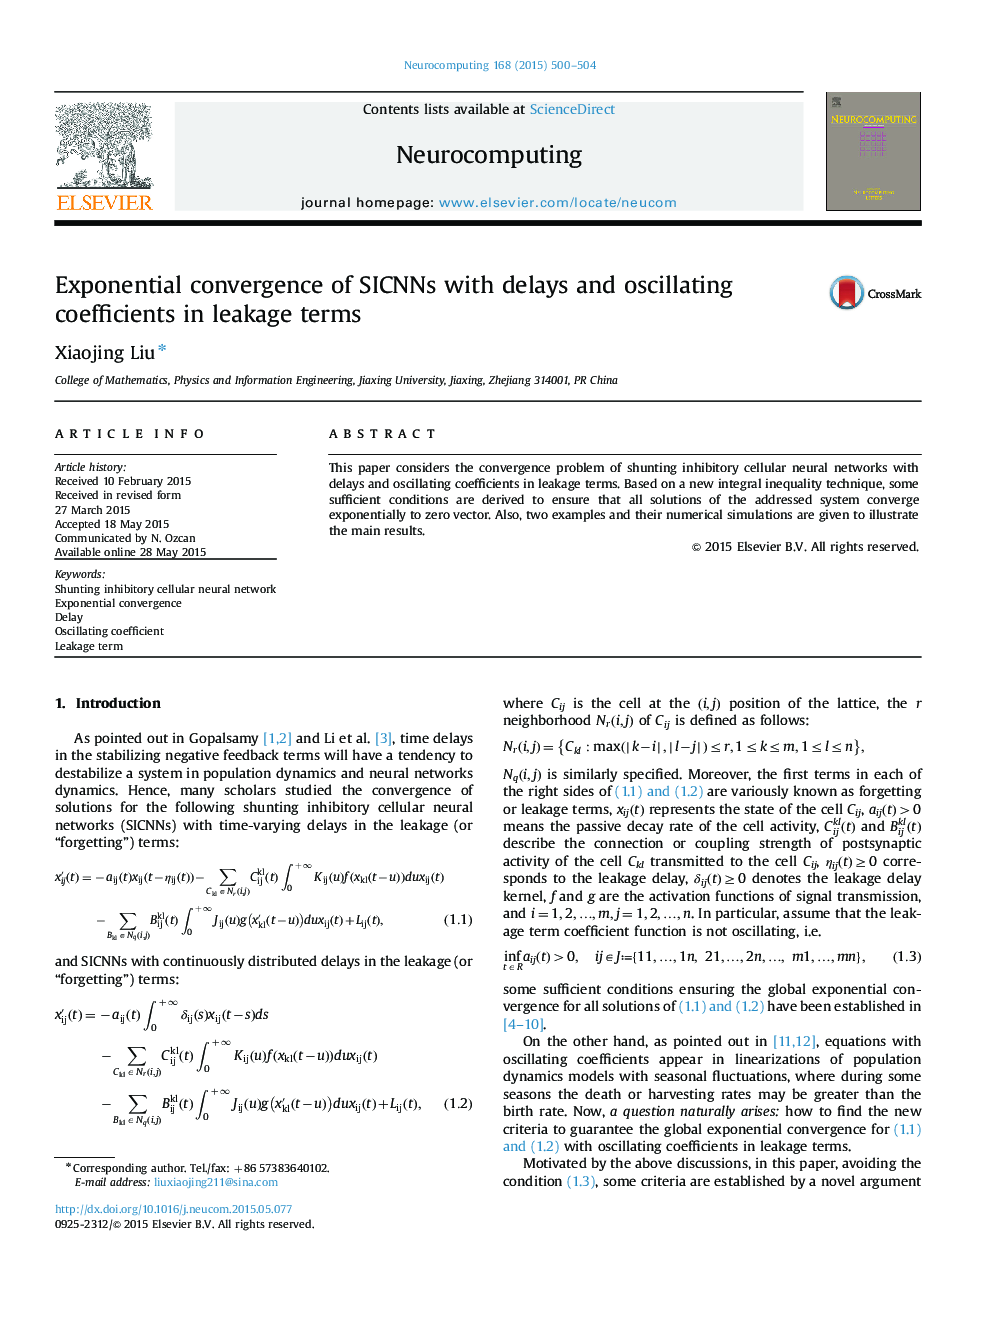 Exponential convergence of SICNNs with delays and oscillating coefficients in leakage terms